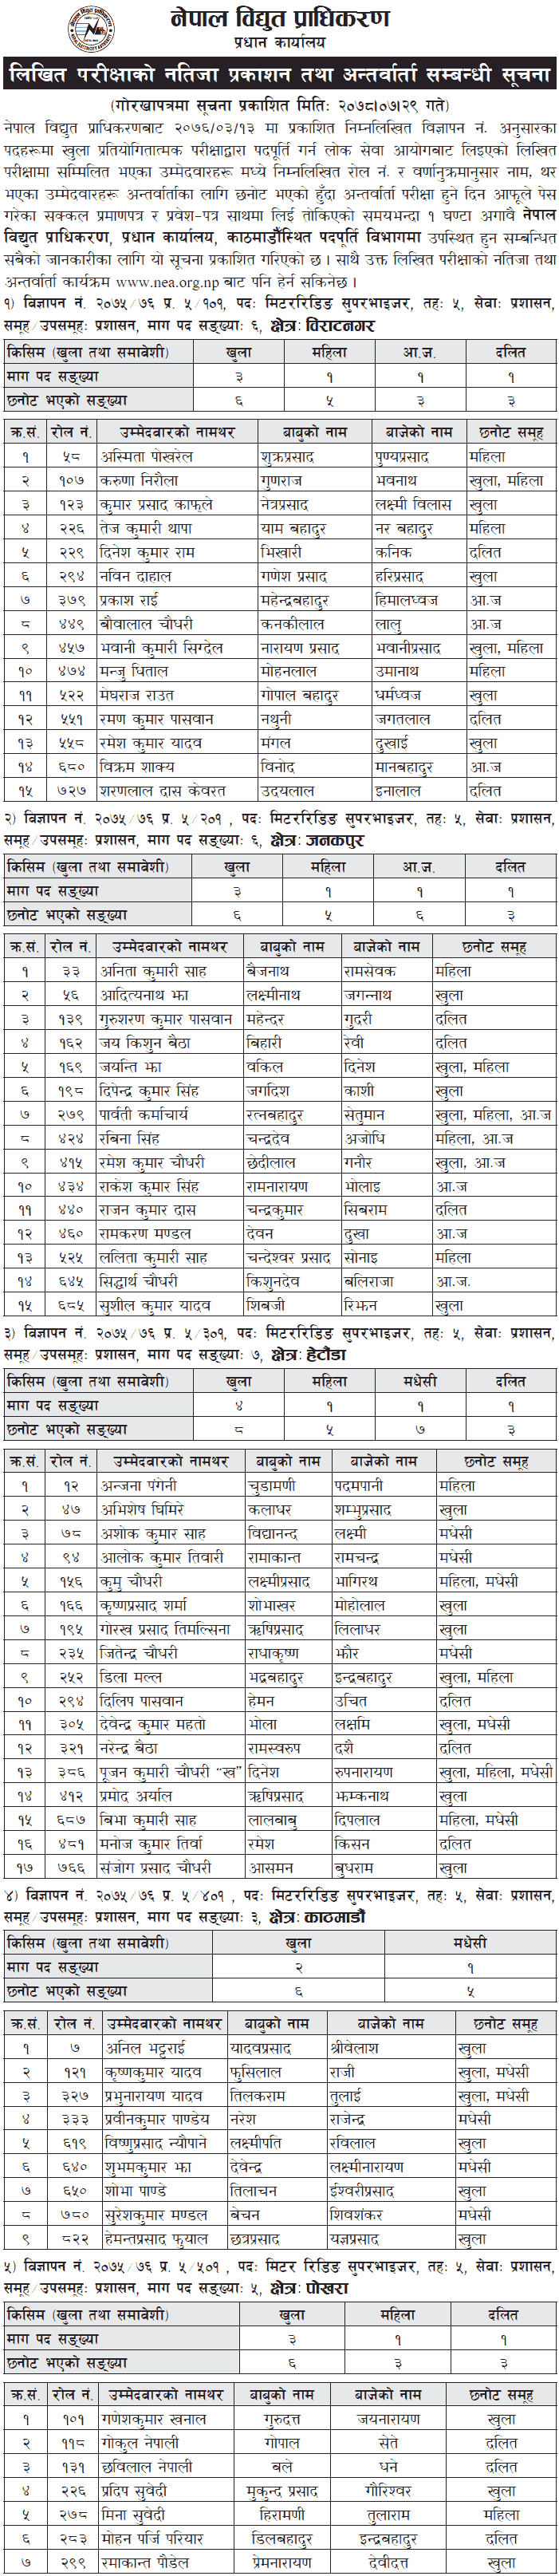 Nepal Electricity Authority Published 5th Level Written Exam Results and Interview Programs 1